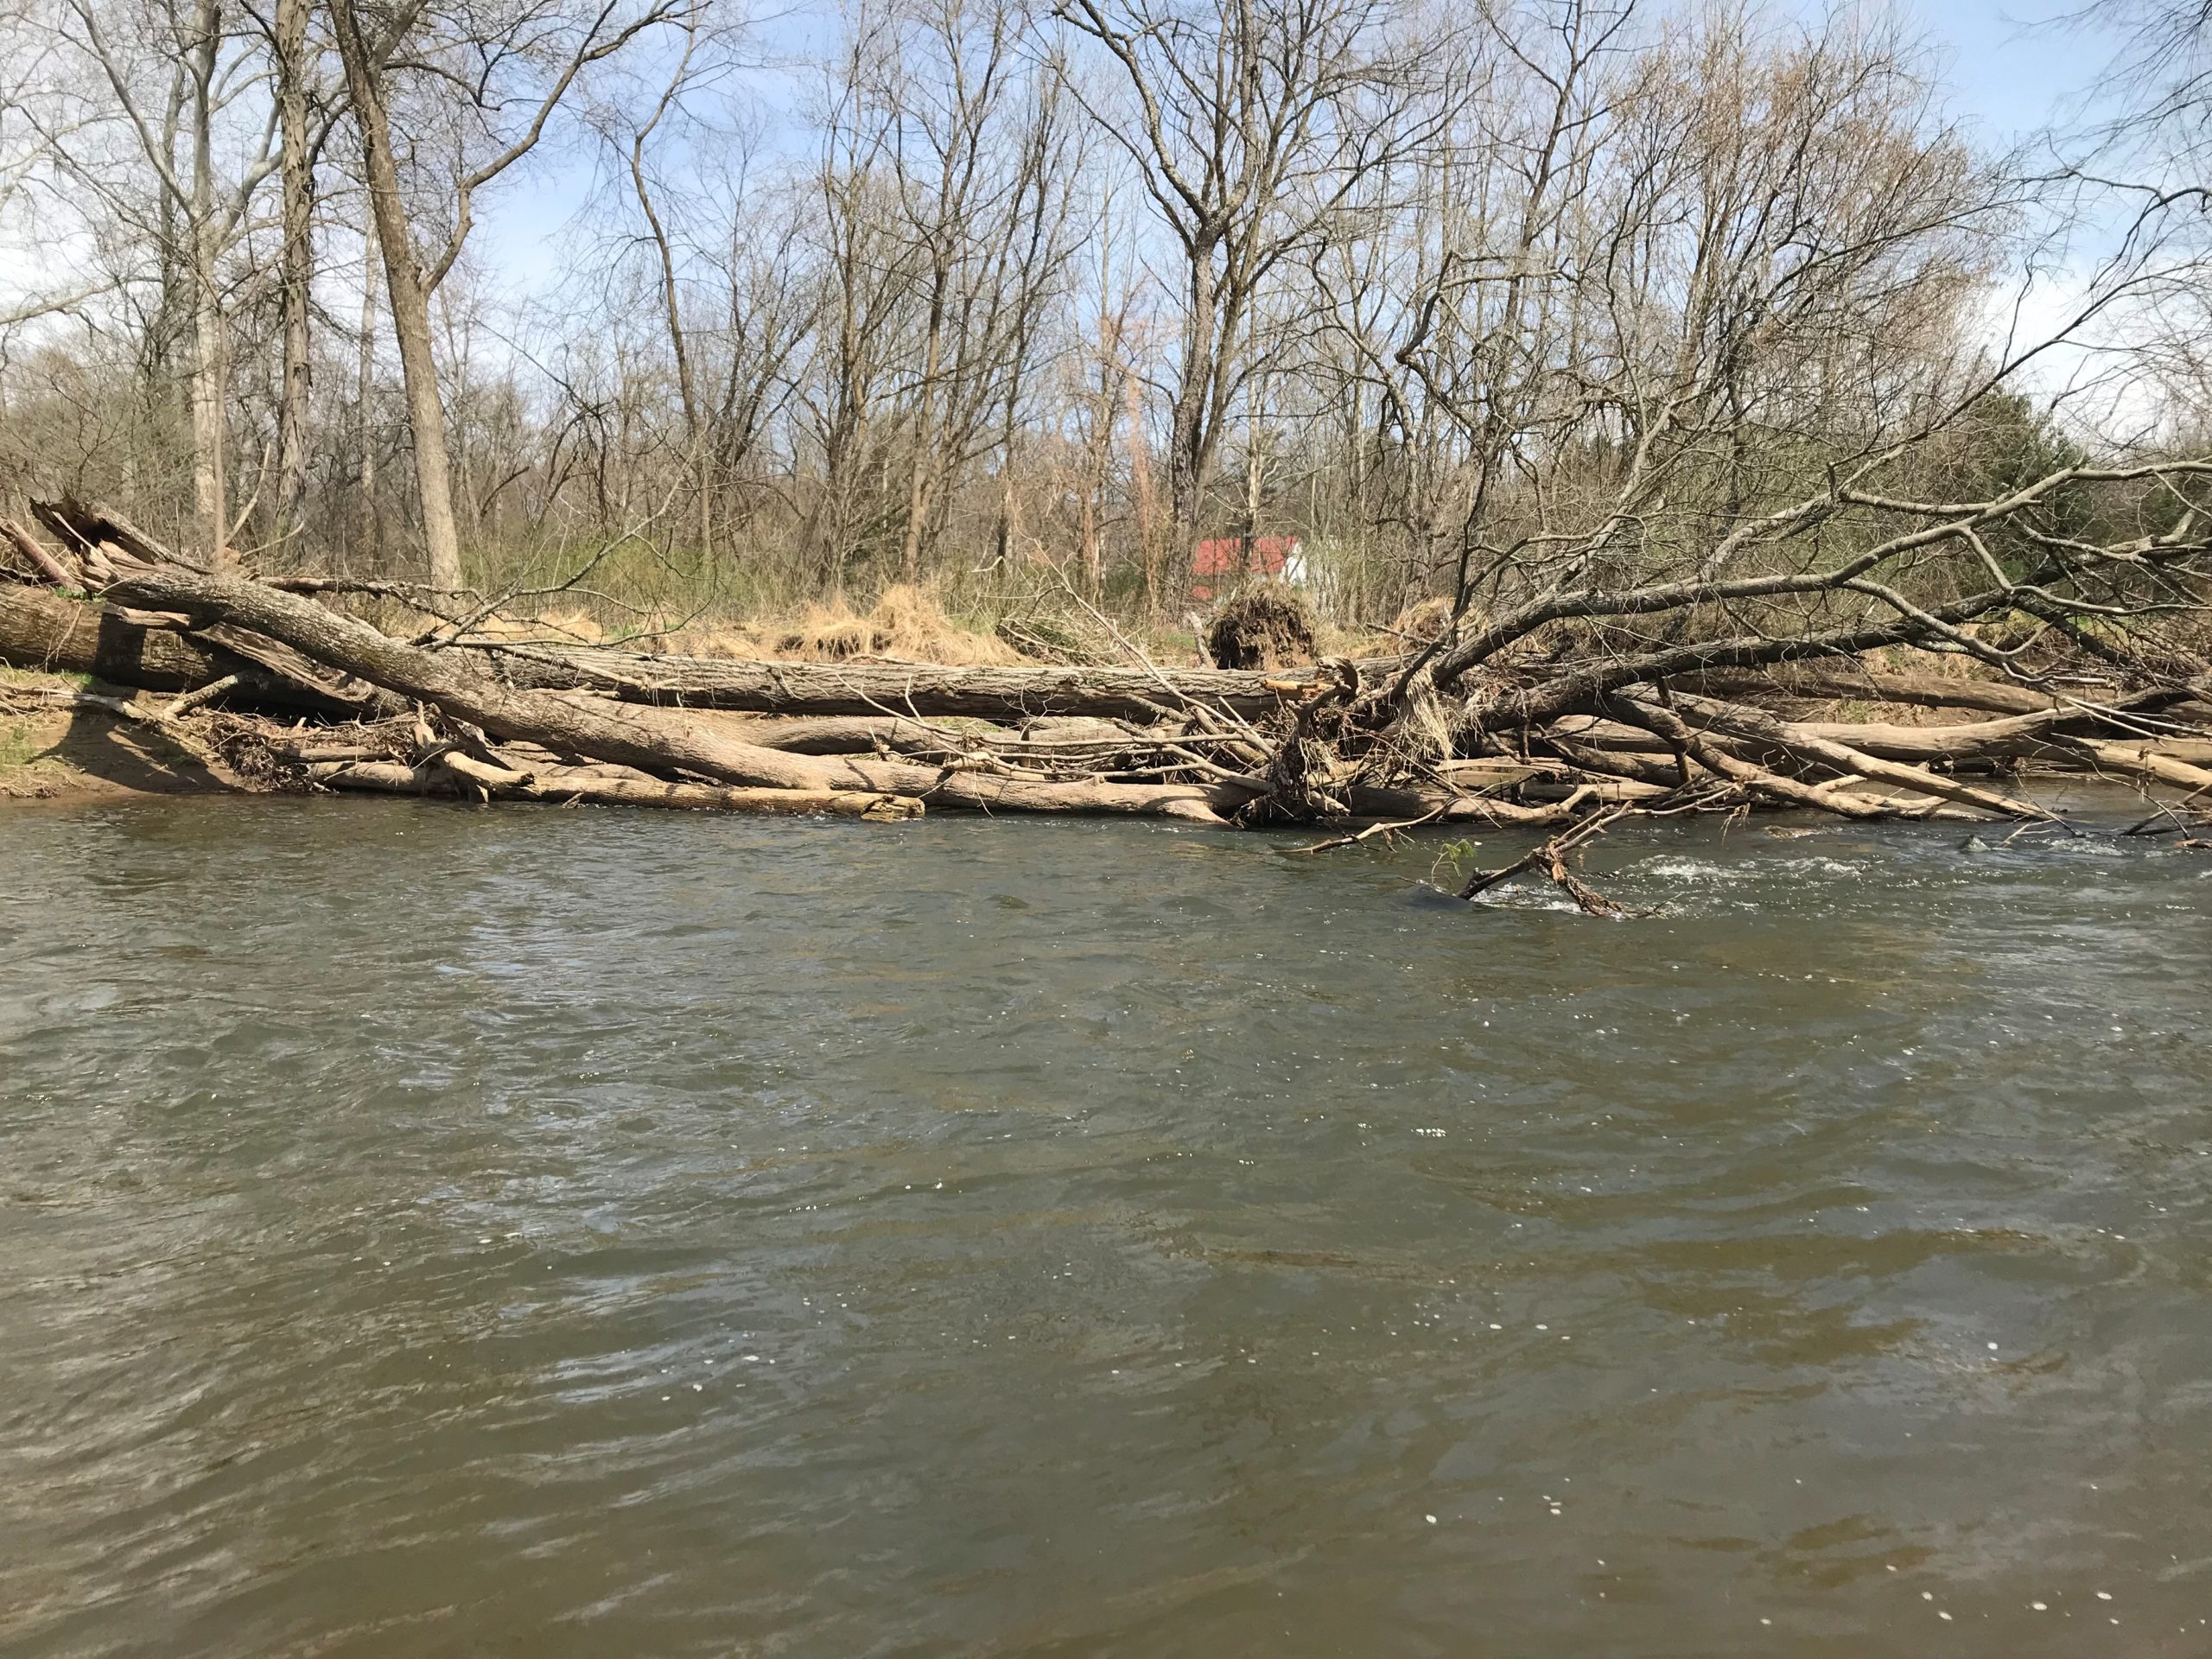 Benefits of Large Woody Debris in Streams - Doc Fritchey Trout Unlimited